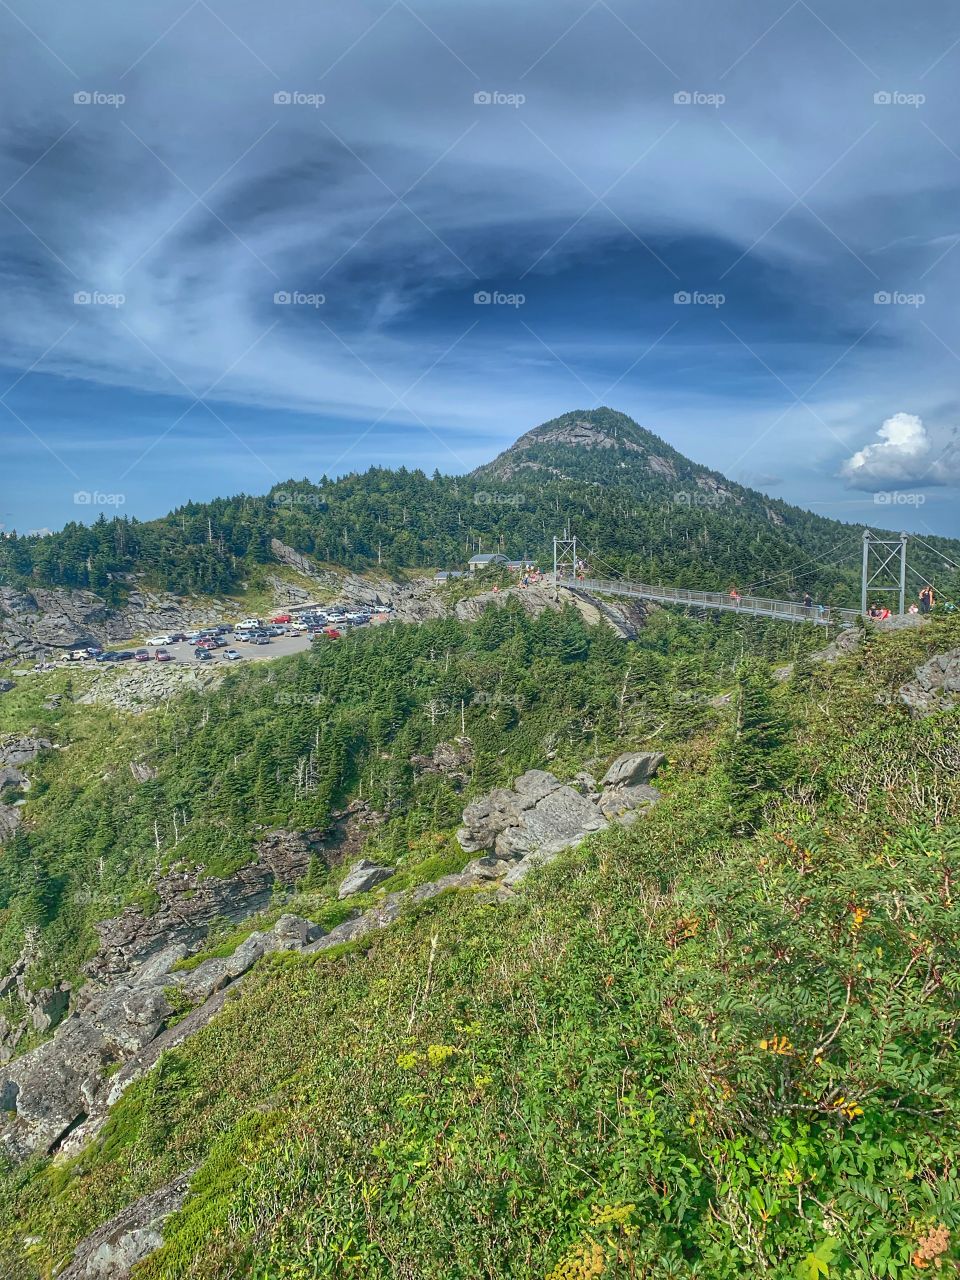 A swinging bridge a mile above sea level. The clouds forming around the mountain top are amazing. Grandfather Mountain in North Carolina. 